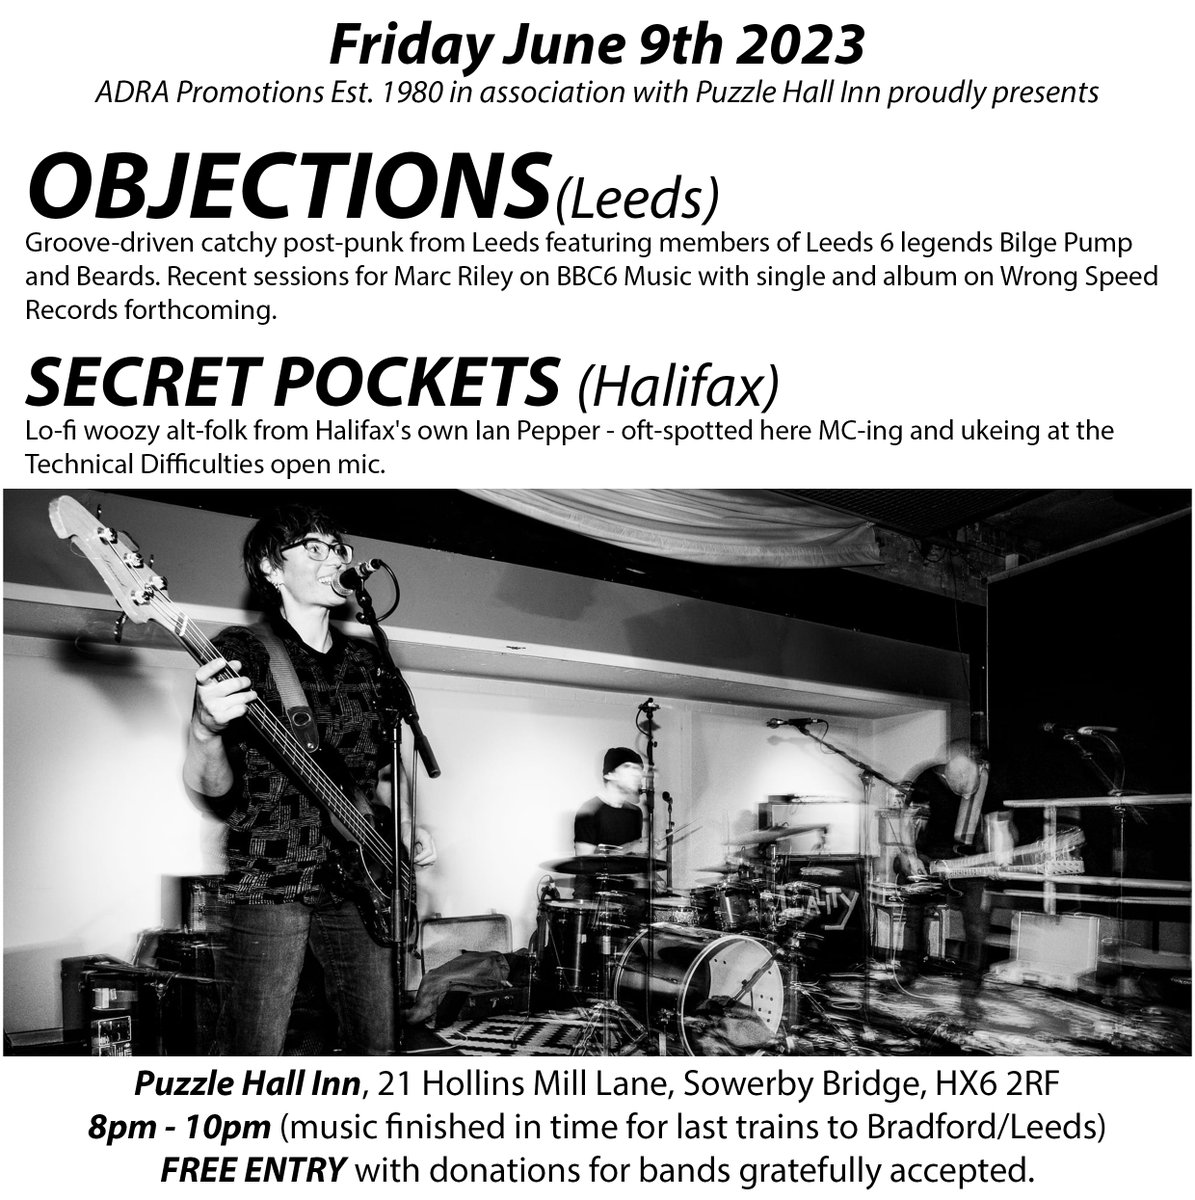 Glad to have this gig rescheduled for Friday June 9th w/ @ObjectionsBand at @puzzlehallinn in Sowerby Bridge.